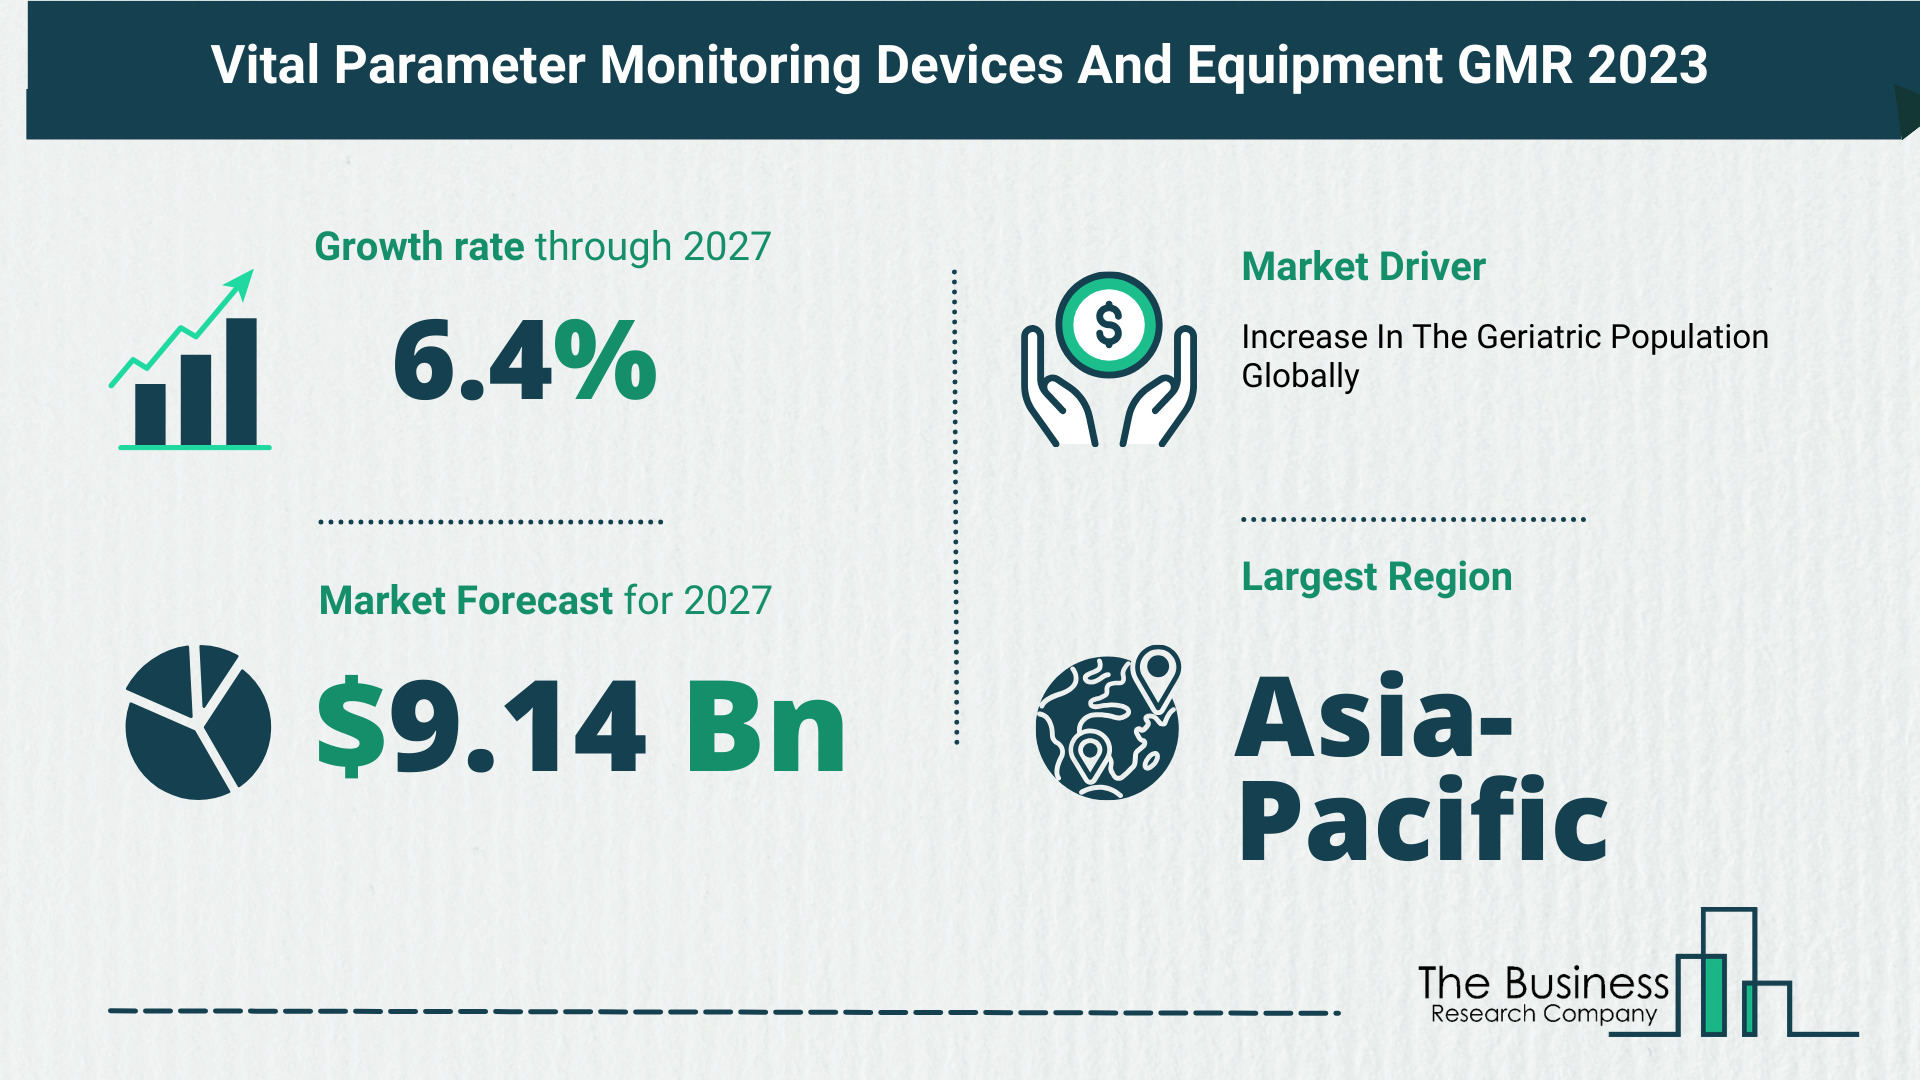 Key Trends And Drivers In The Vital Parameter Monitoring Devices And Equipment Market 2023